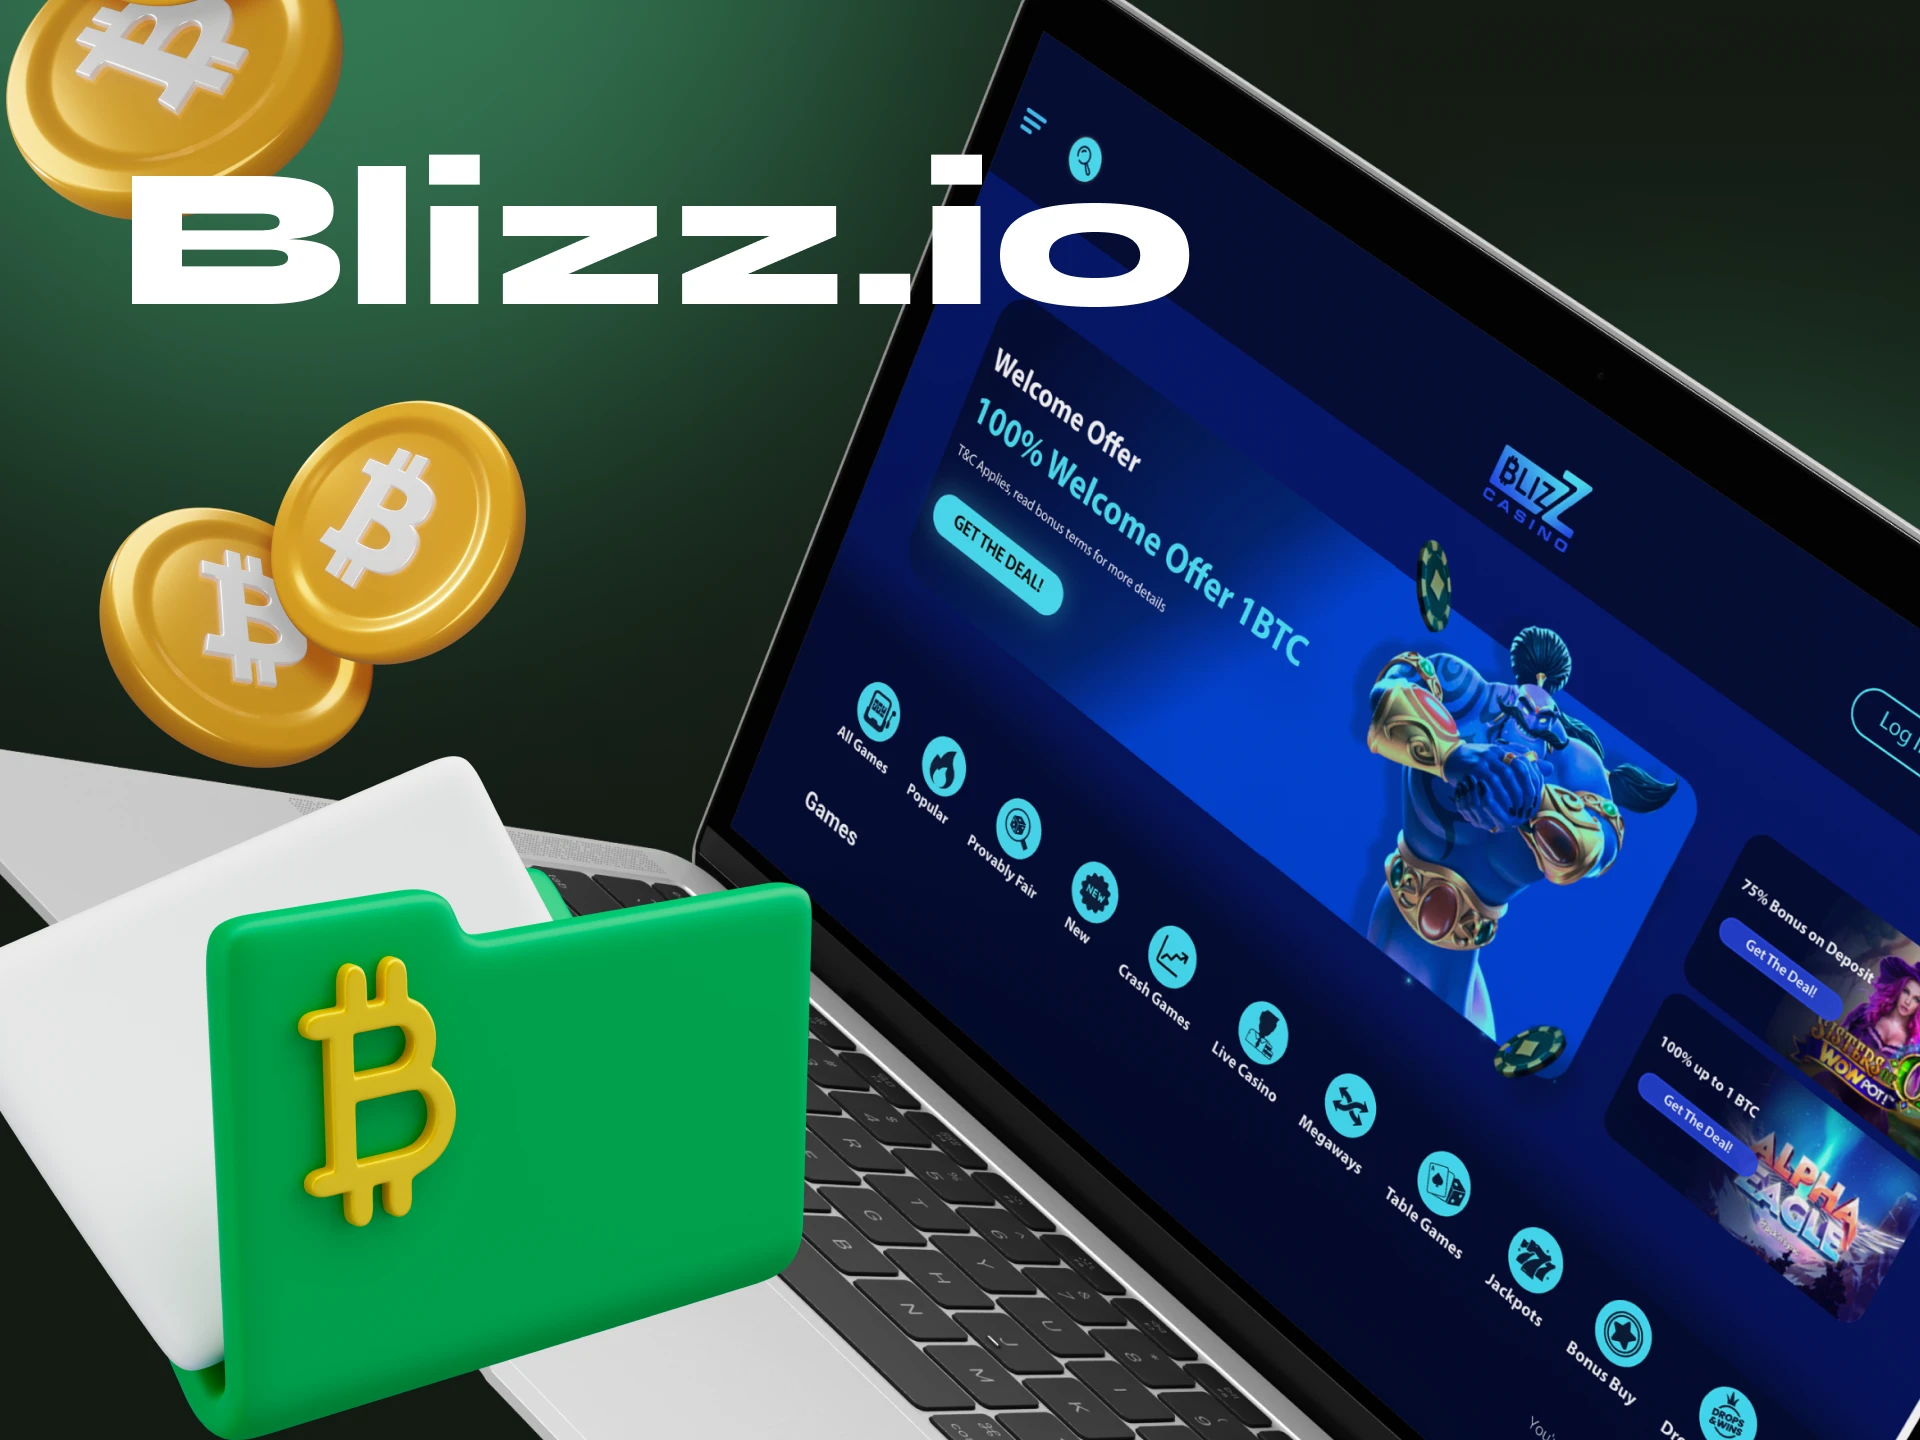 What cryptocurrencies does Blizz.io casino accept.